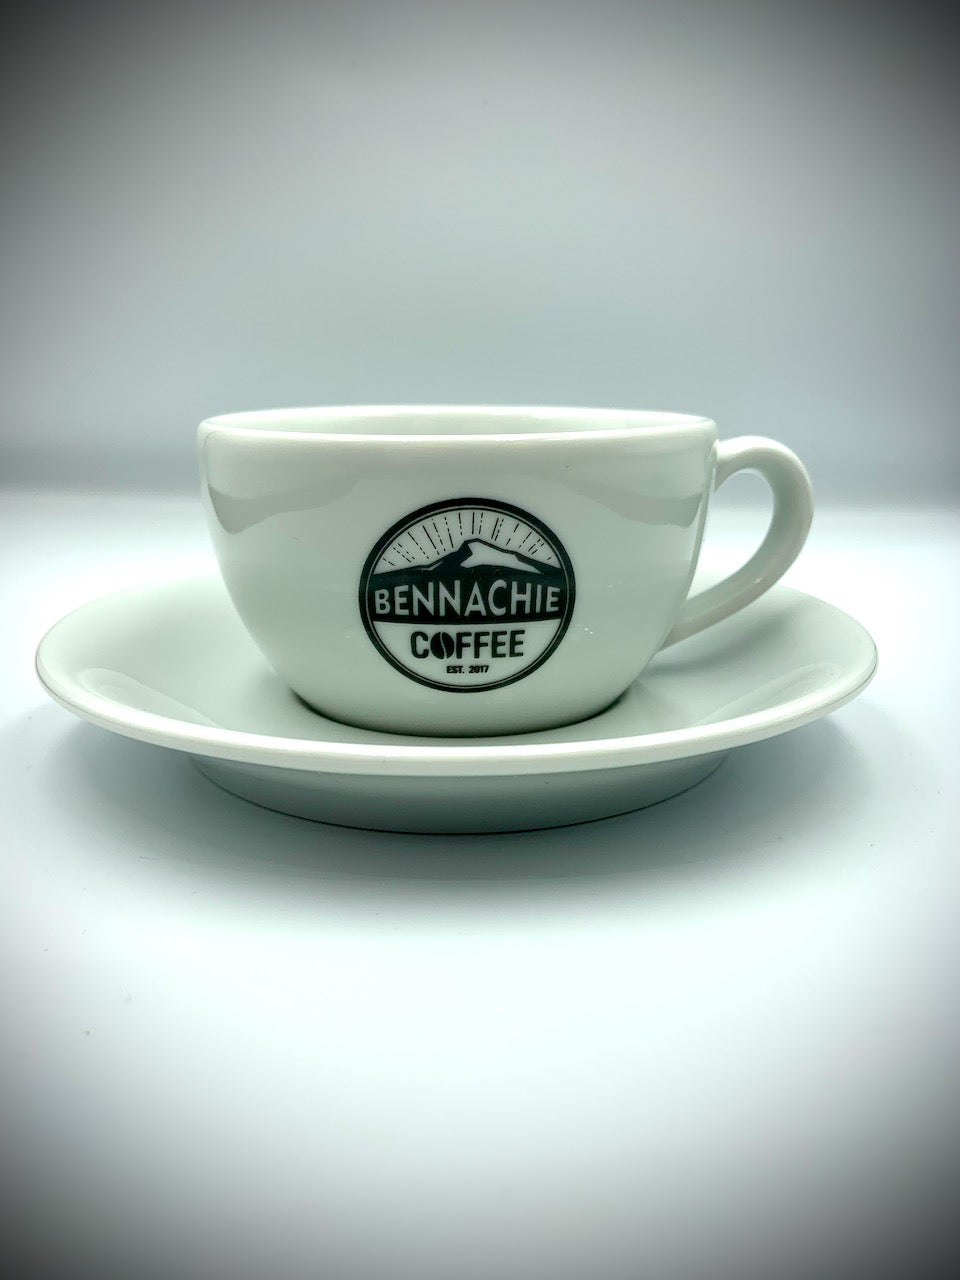 Cappuccino cup & saucer - with Bennachie Coffee logo